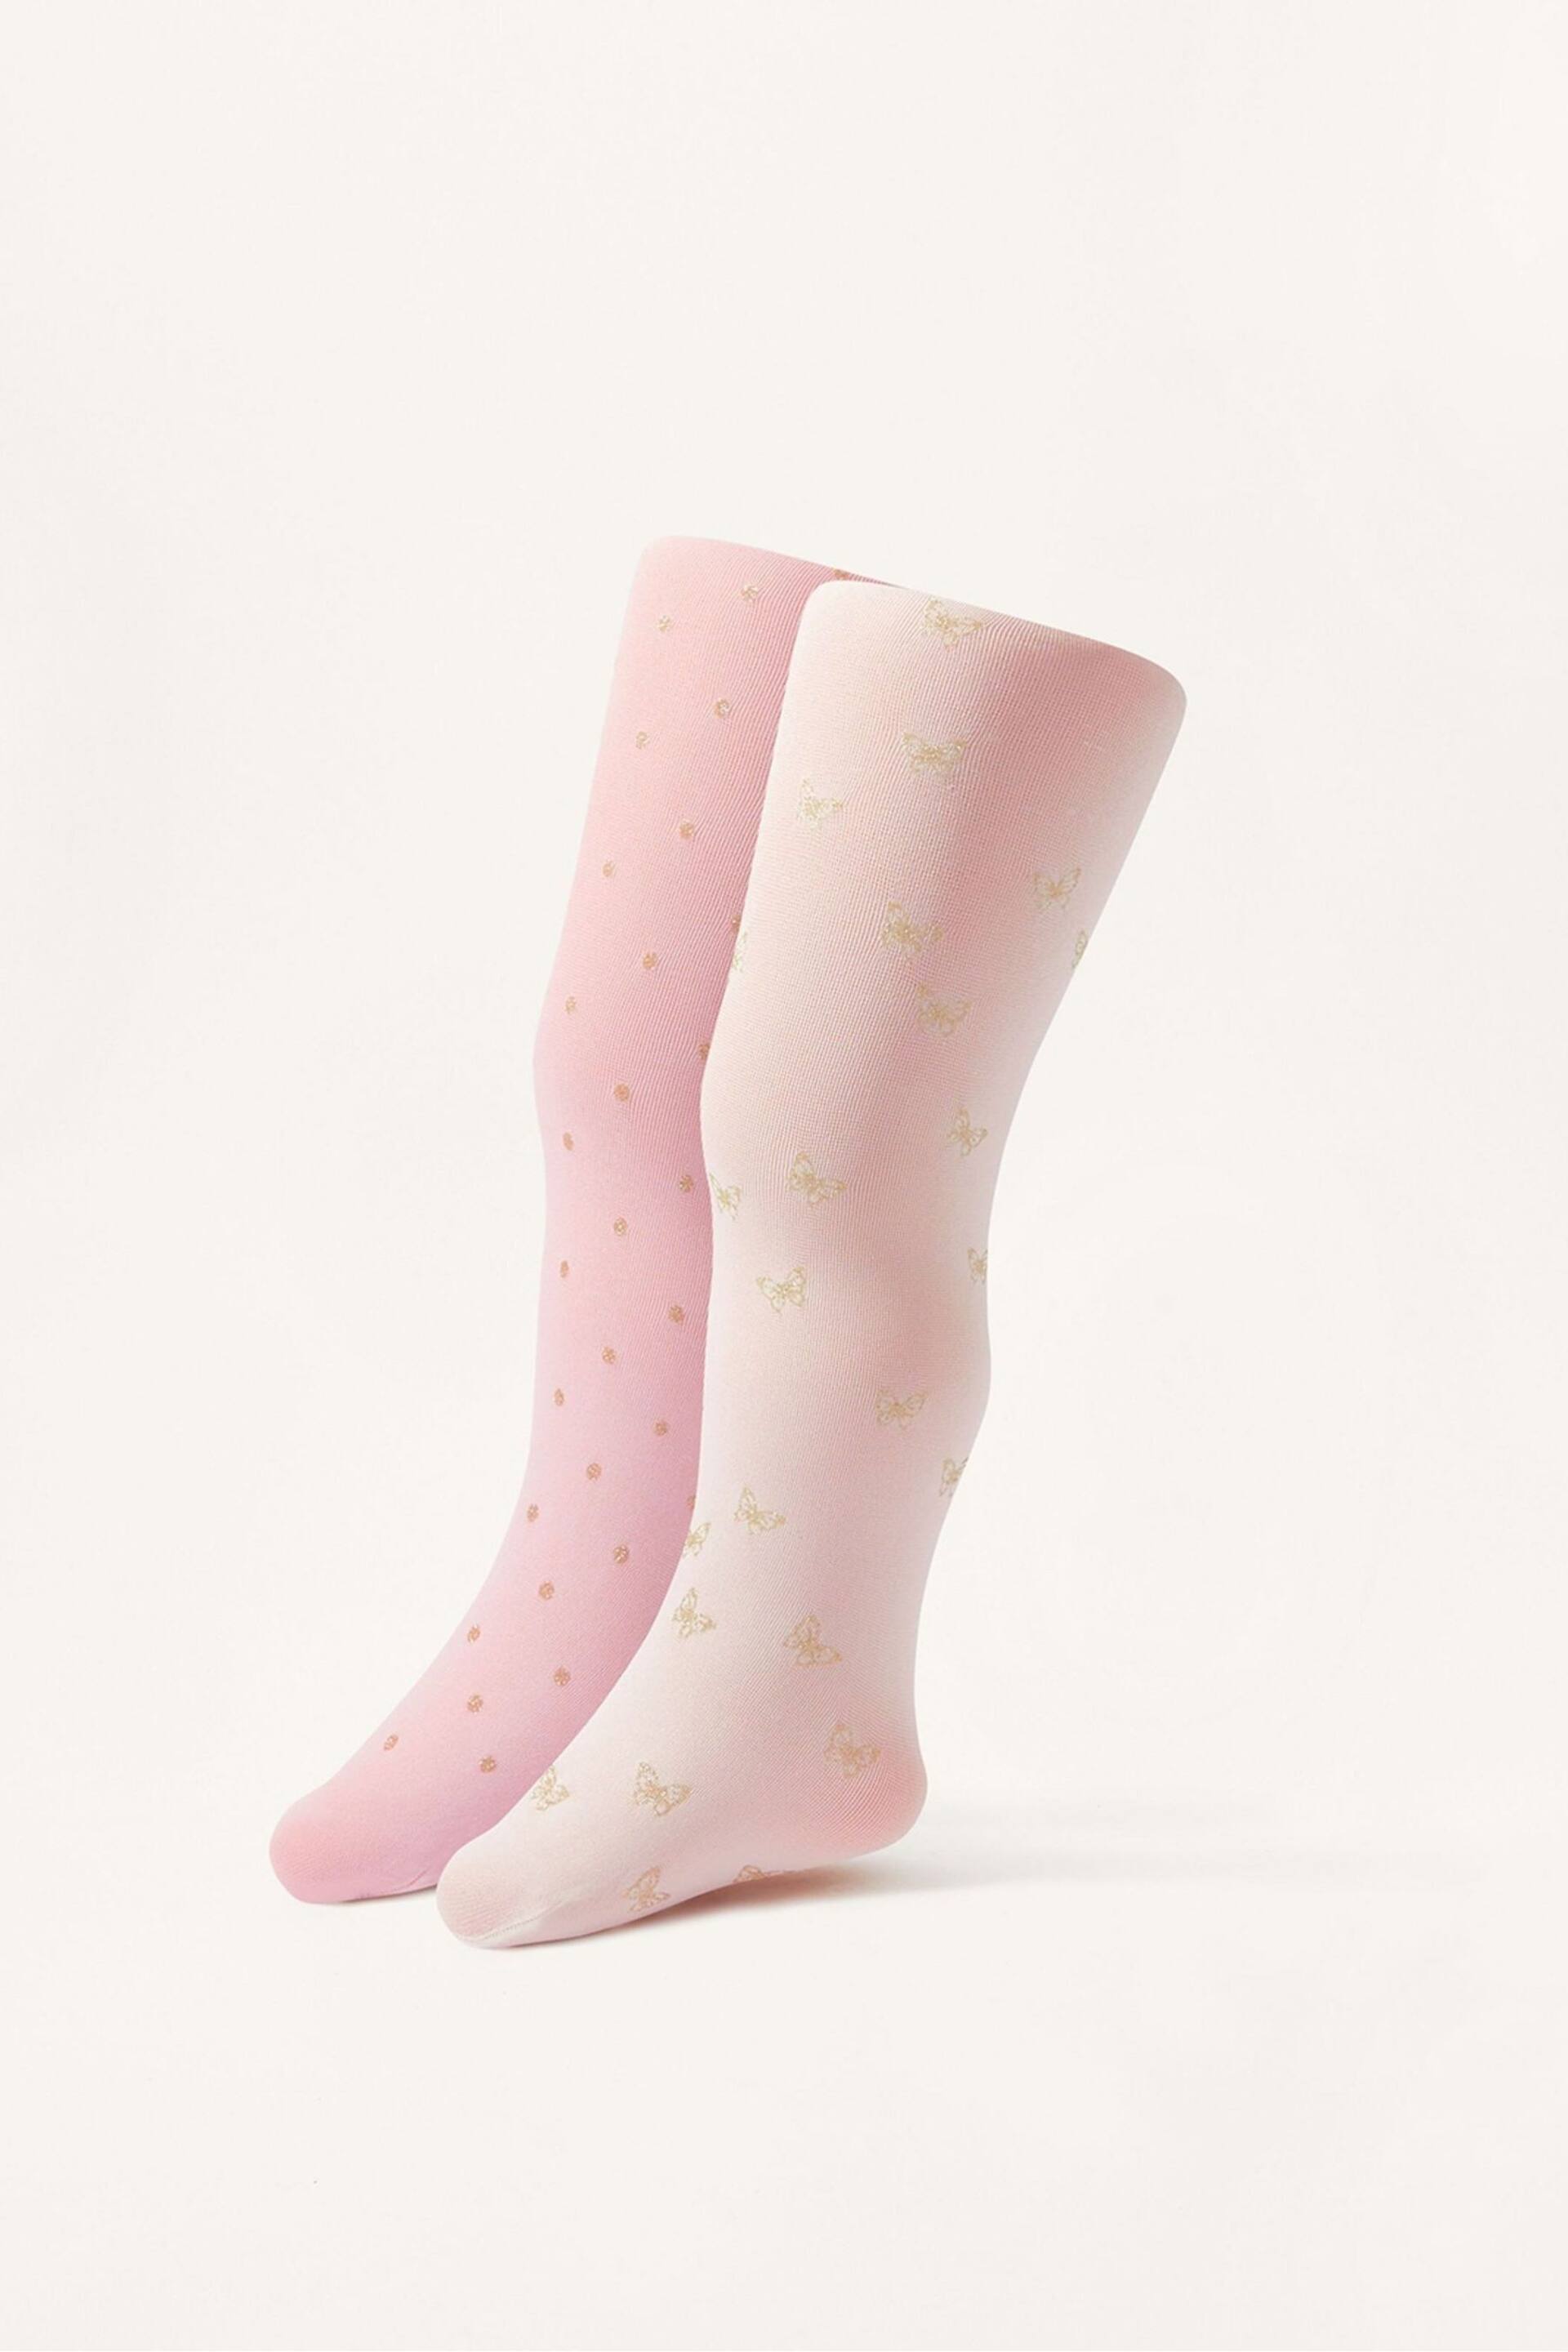 Monsoon Pink Baby Glittery Print Tights 2 Pack - Image 1 of 3